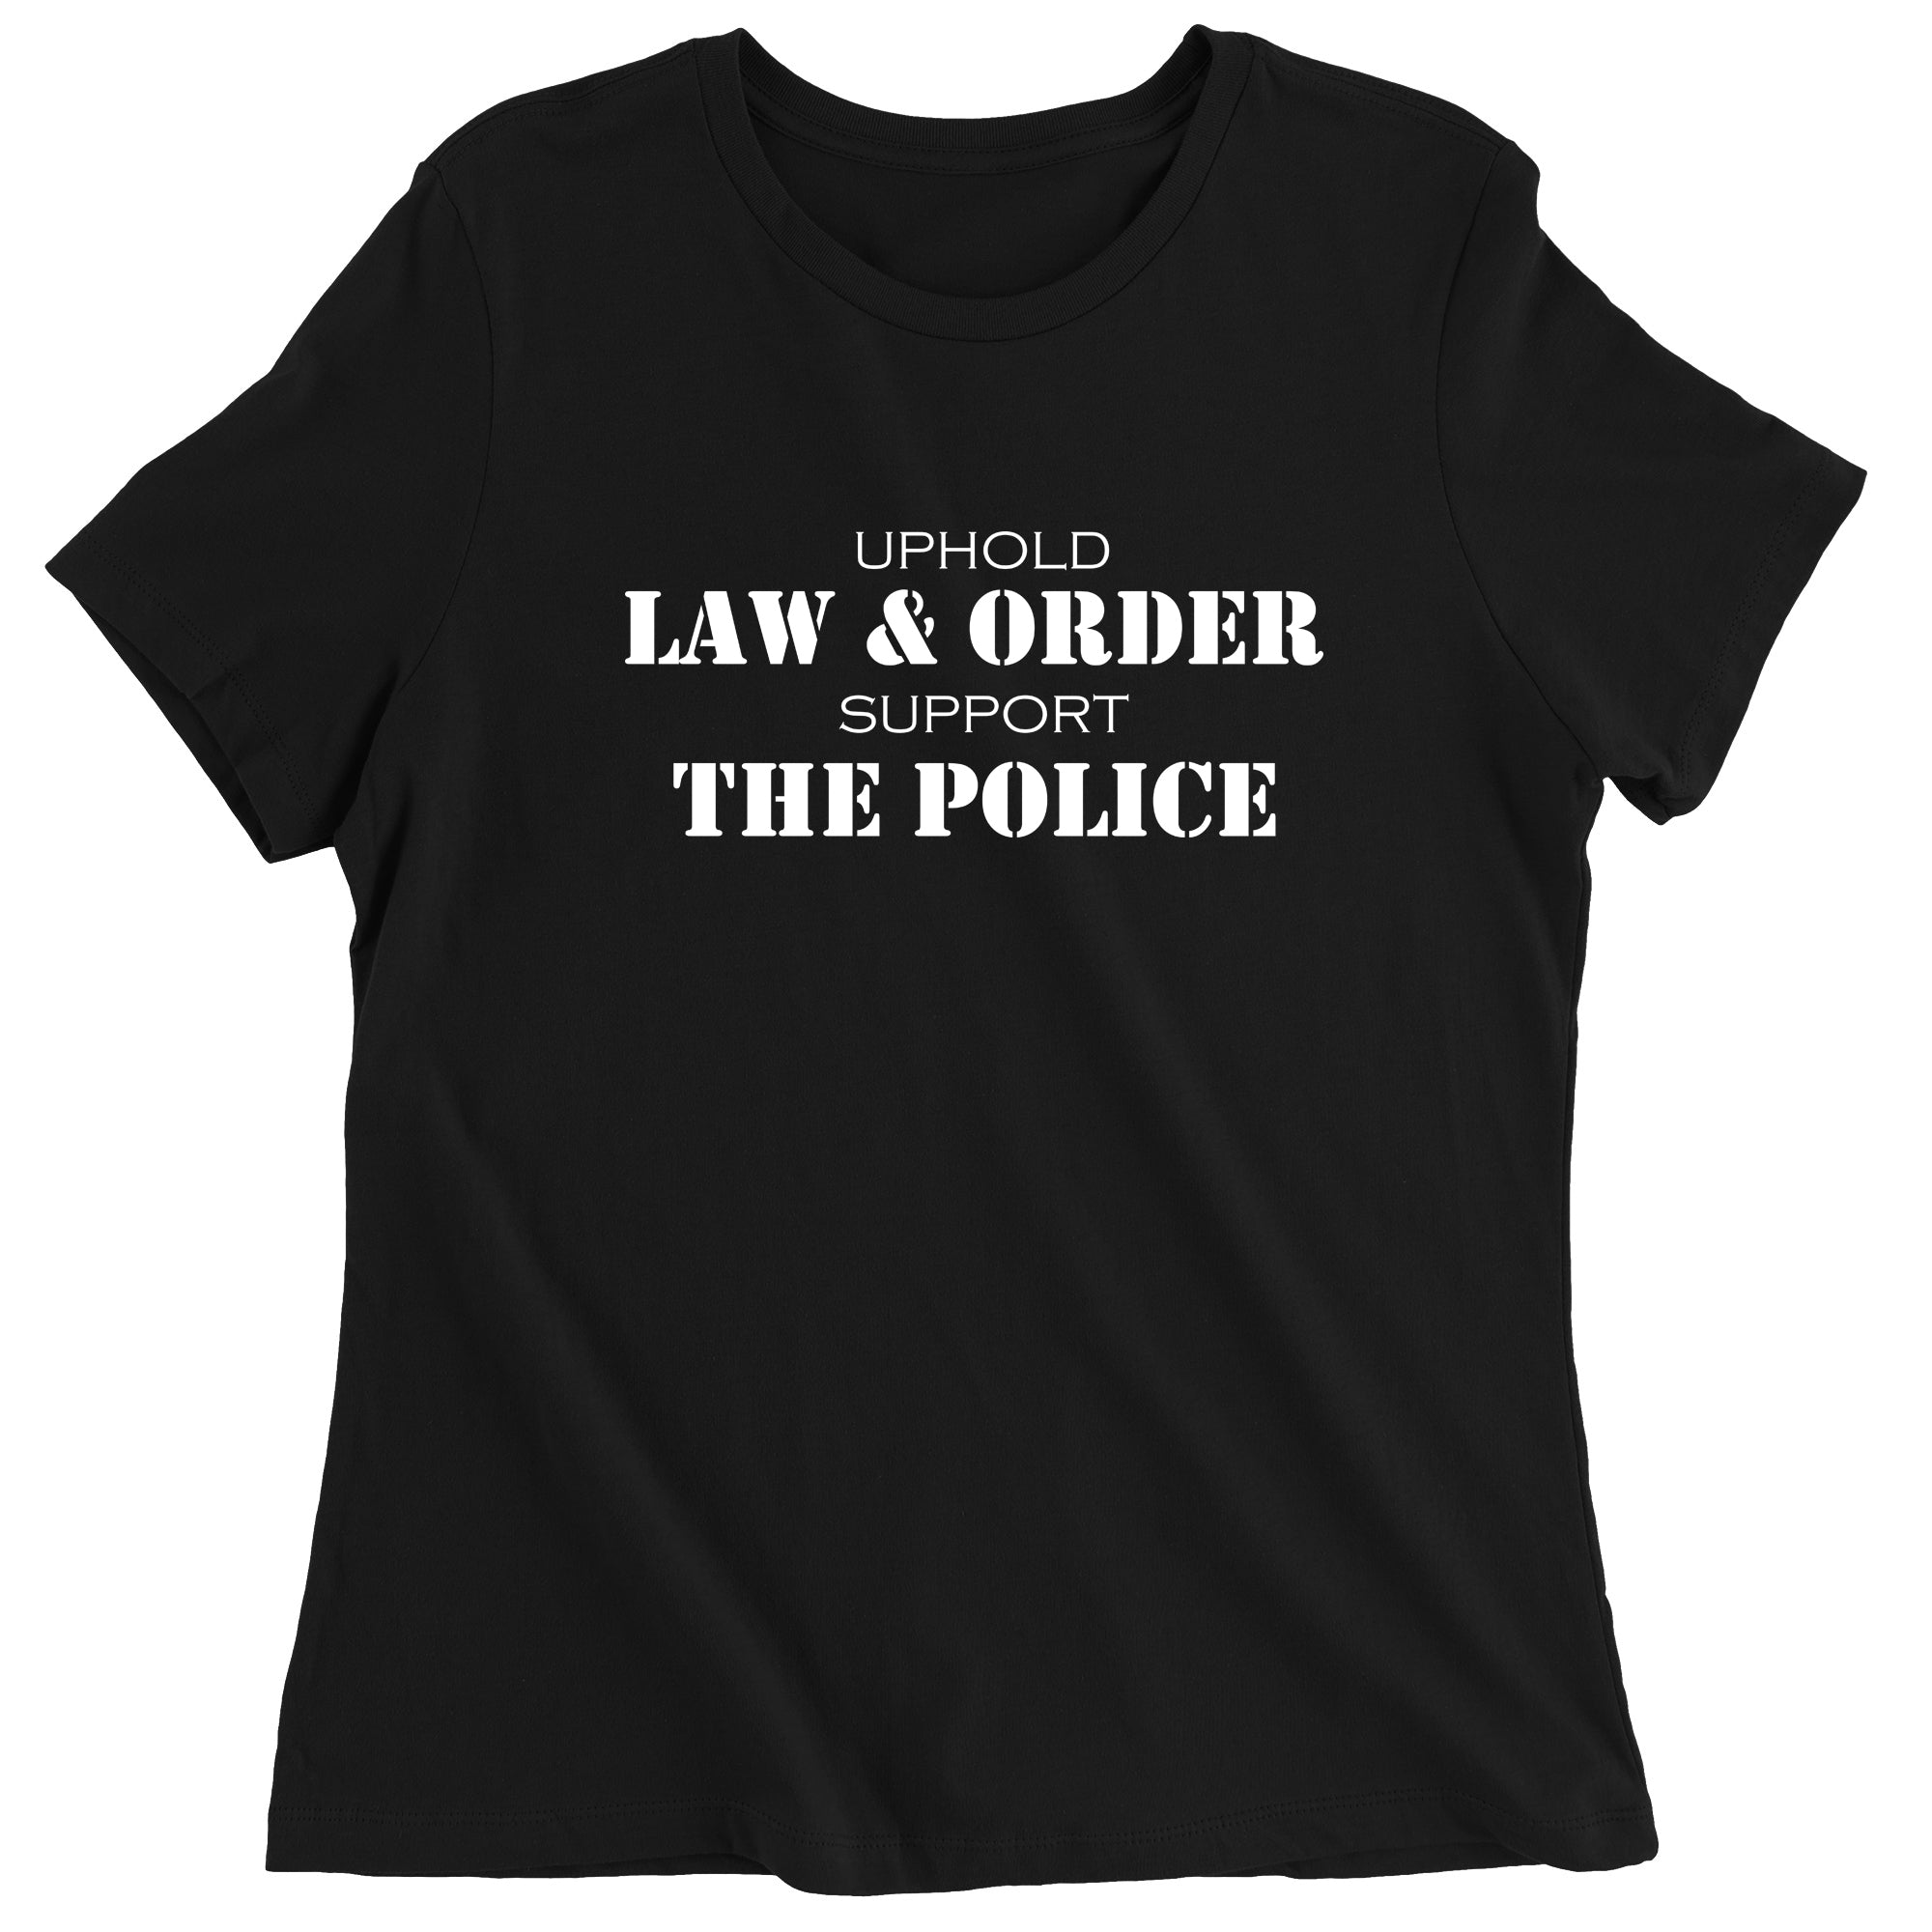 Trump Law & Order And Police Support Women's T-Shirt